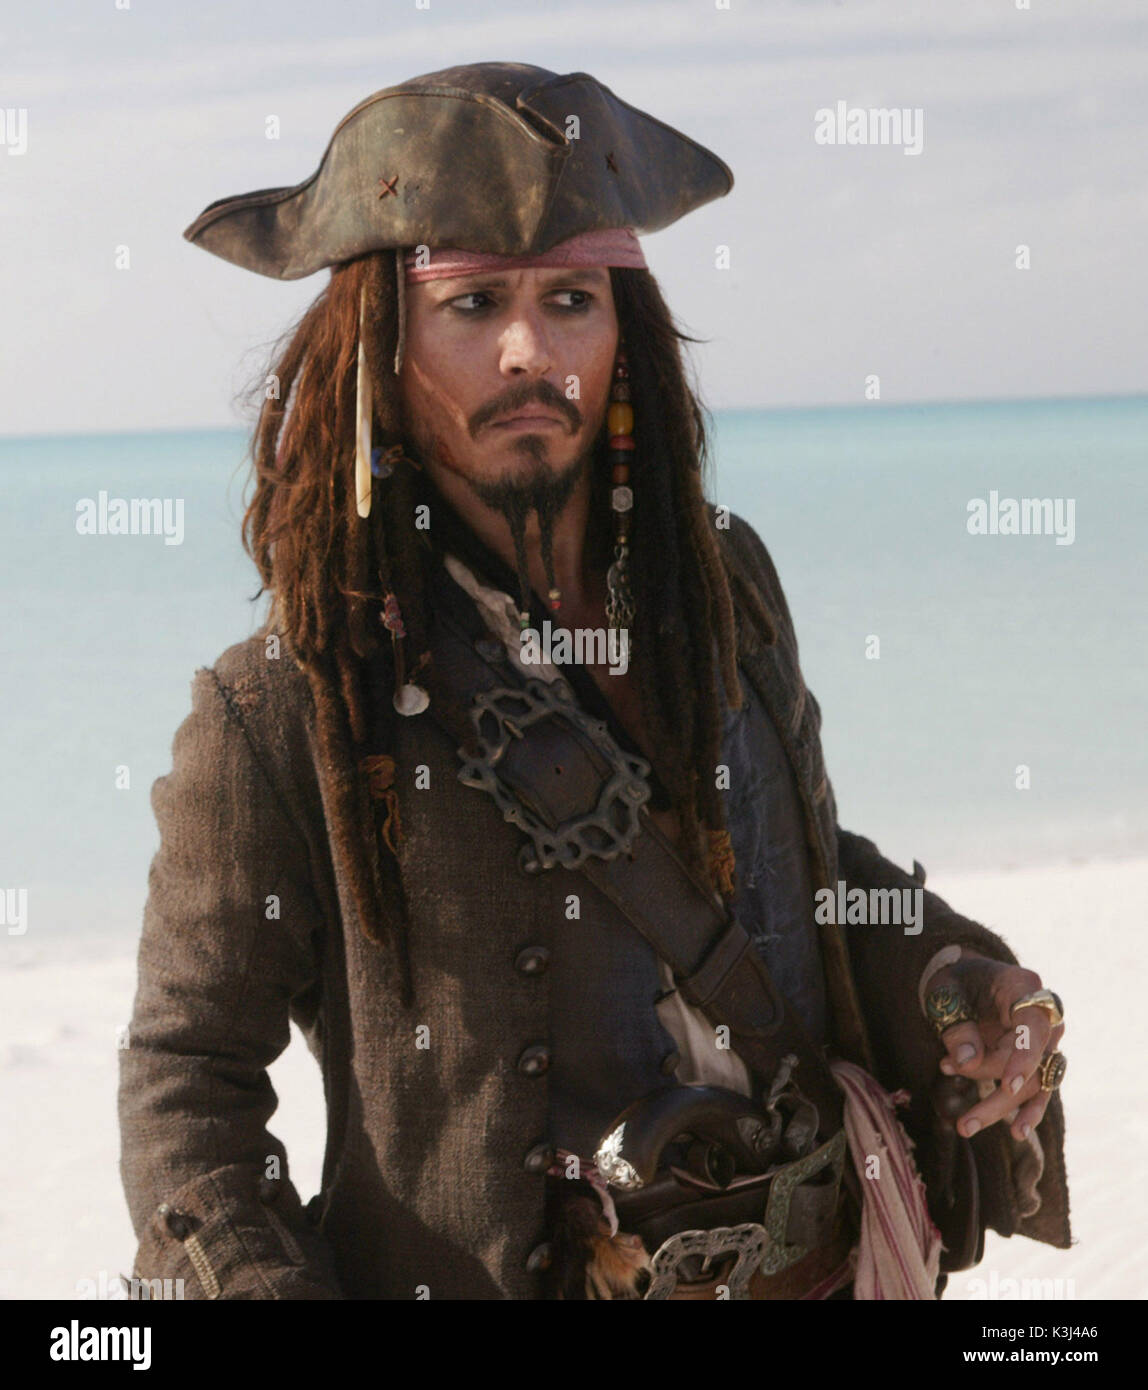 PIRATES OF THE CARIBBEAN: AT WORLD'S END [US 2007]  aka PIRATES OF THE CARIBBEAN 3  JOHNNY DEPP as Captain Jack Sparrow   [cropped]      Date: 2007 Stock Photo